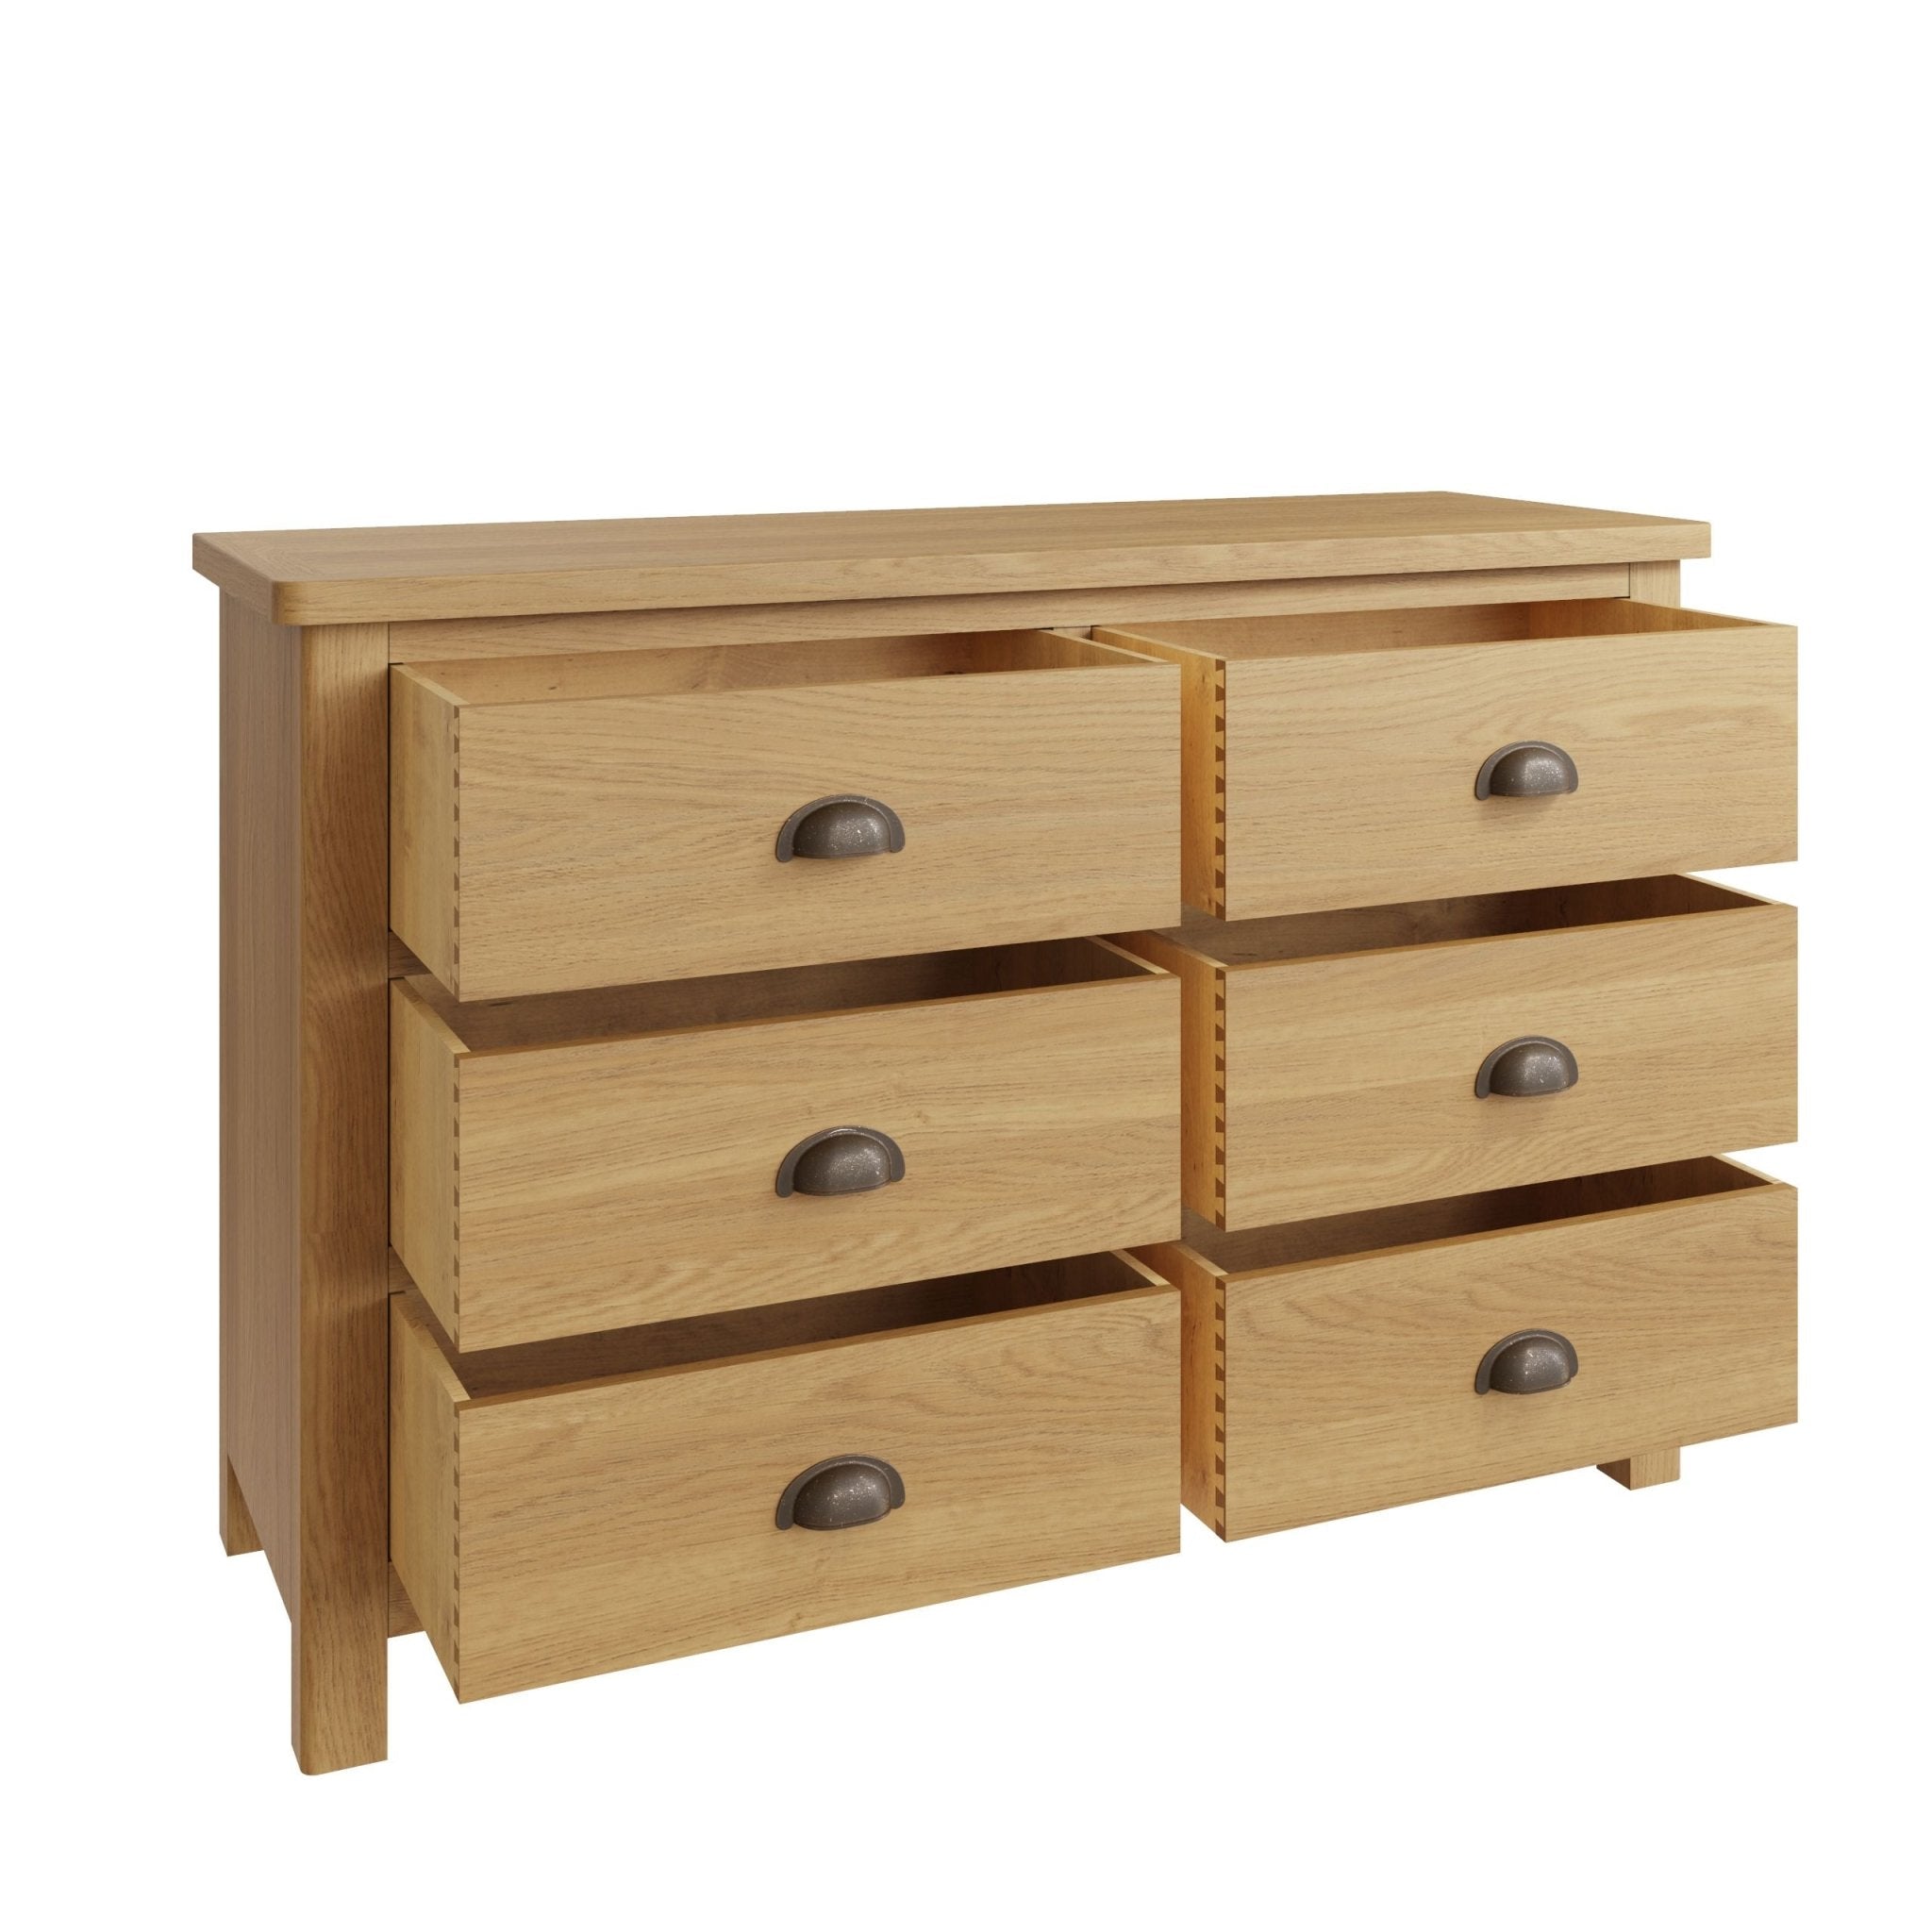 Loxwood Oak 6 Drawer Chest of Drawers - Duck Barn Interiors